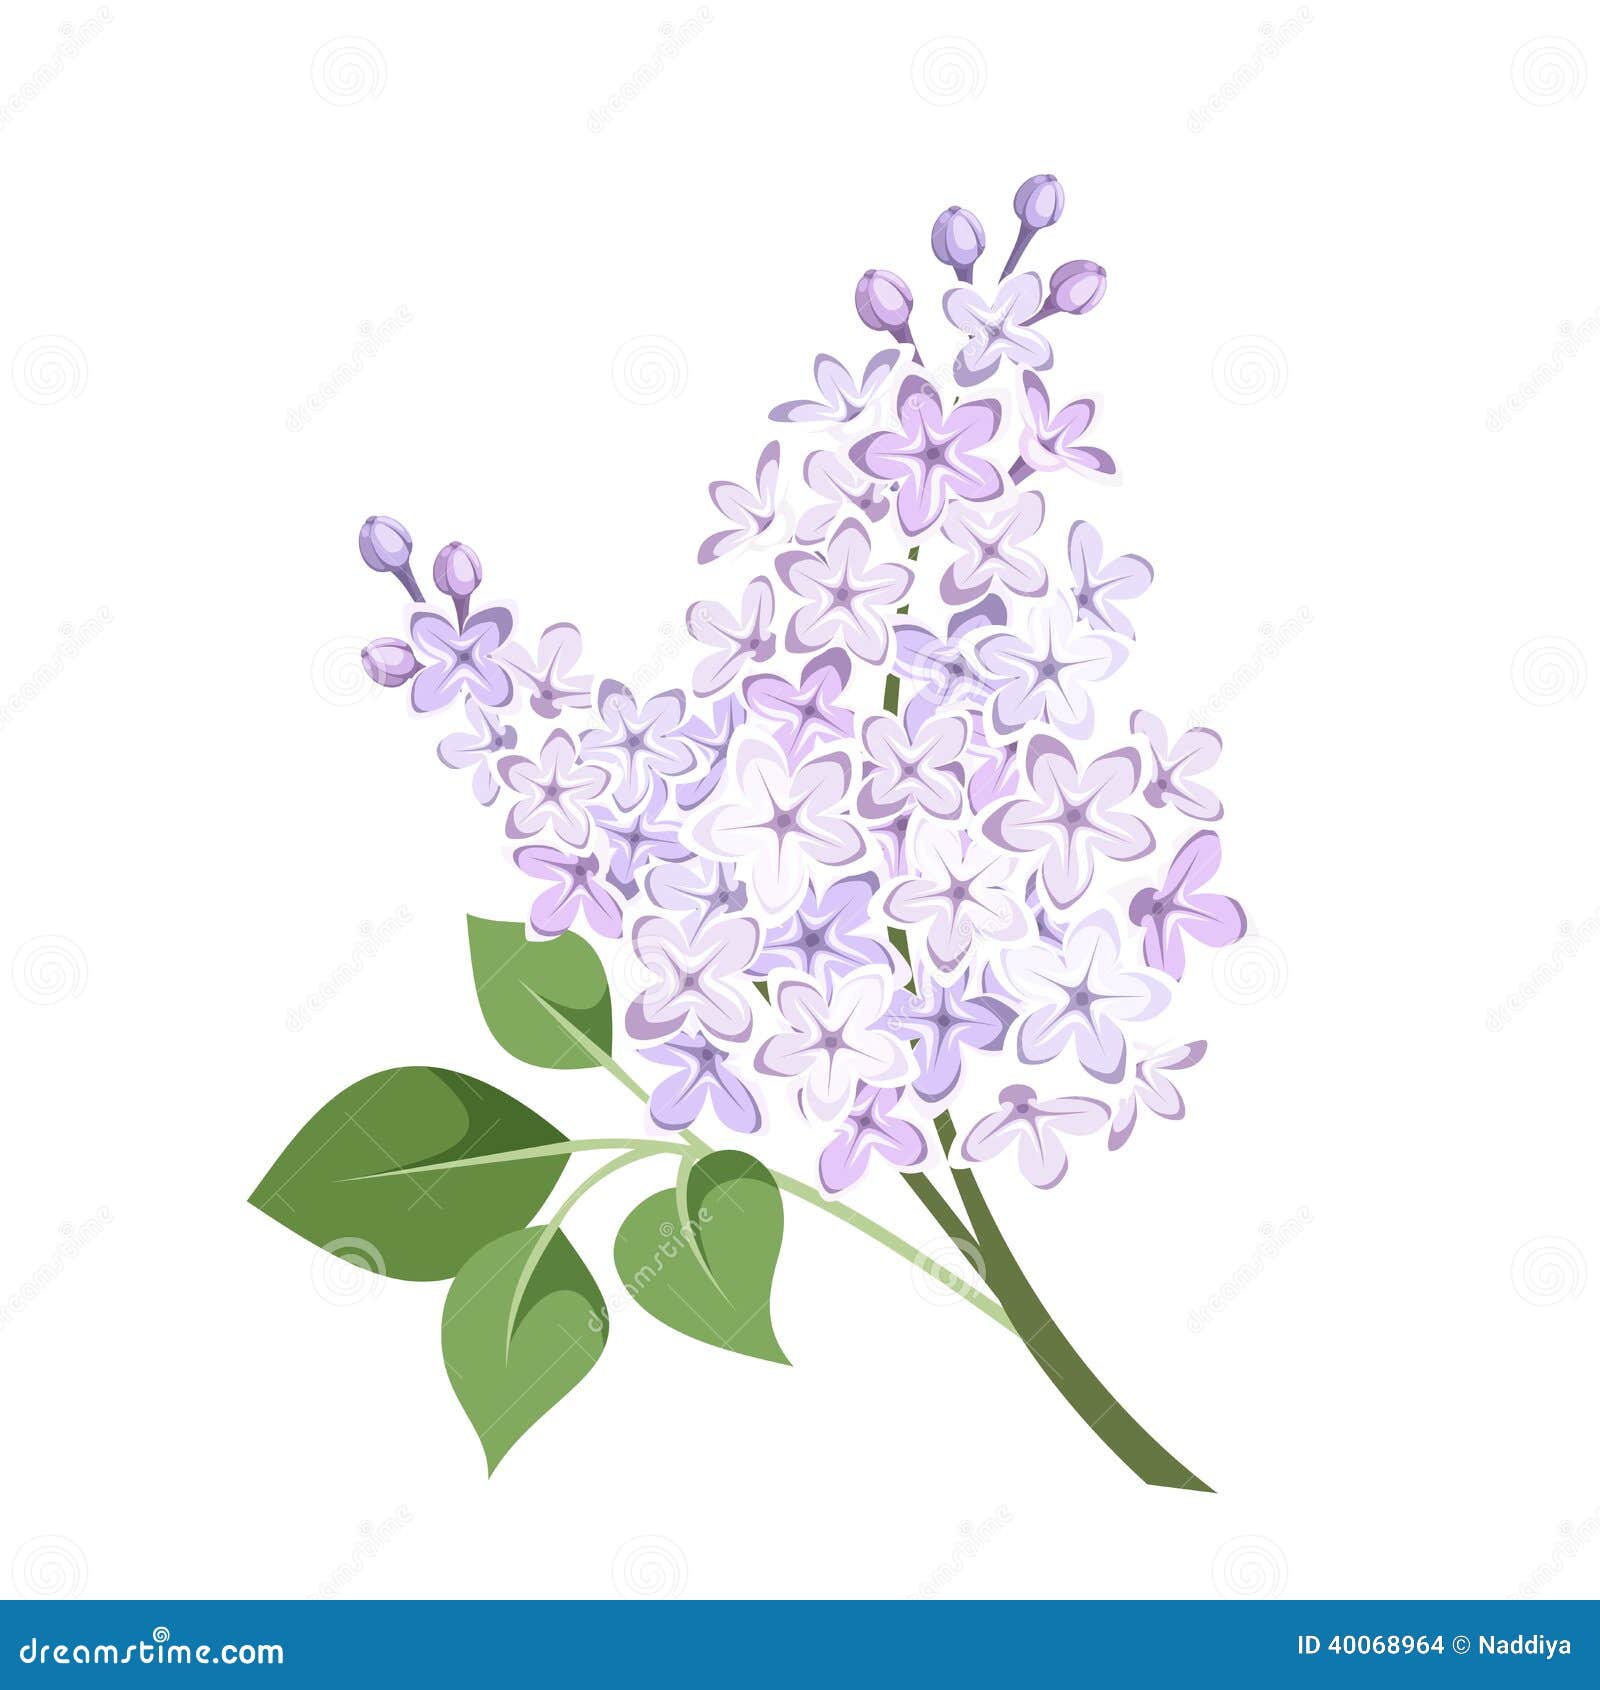 clipart lilac flowers - photo #35